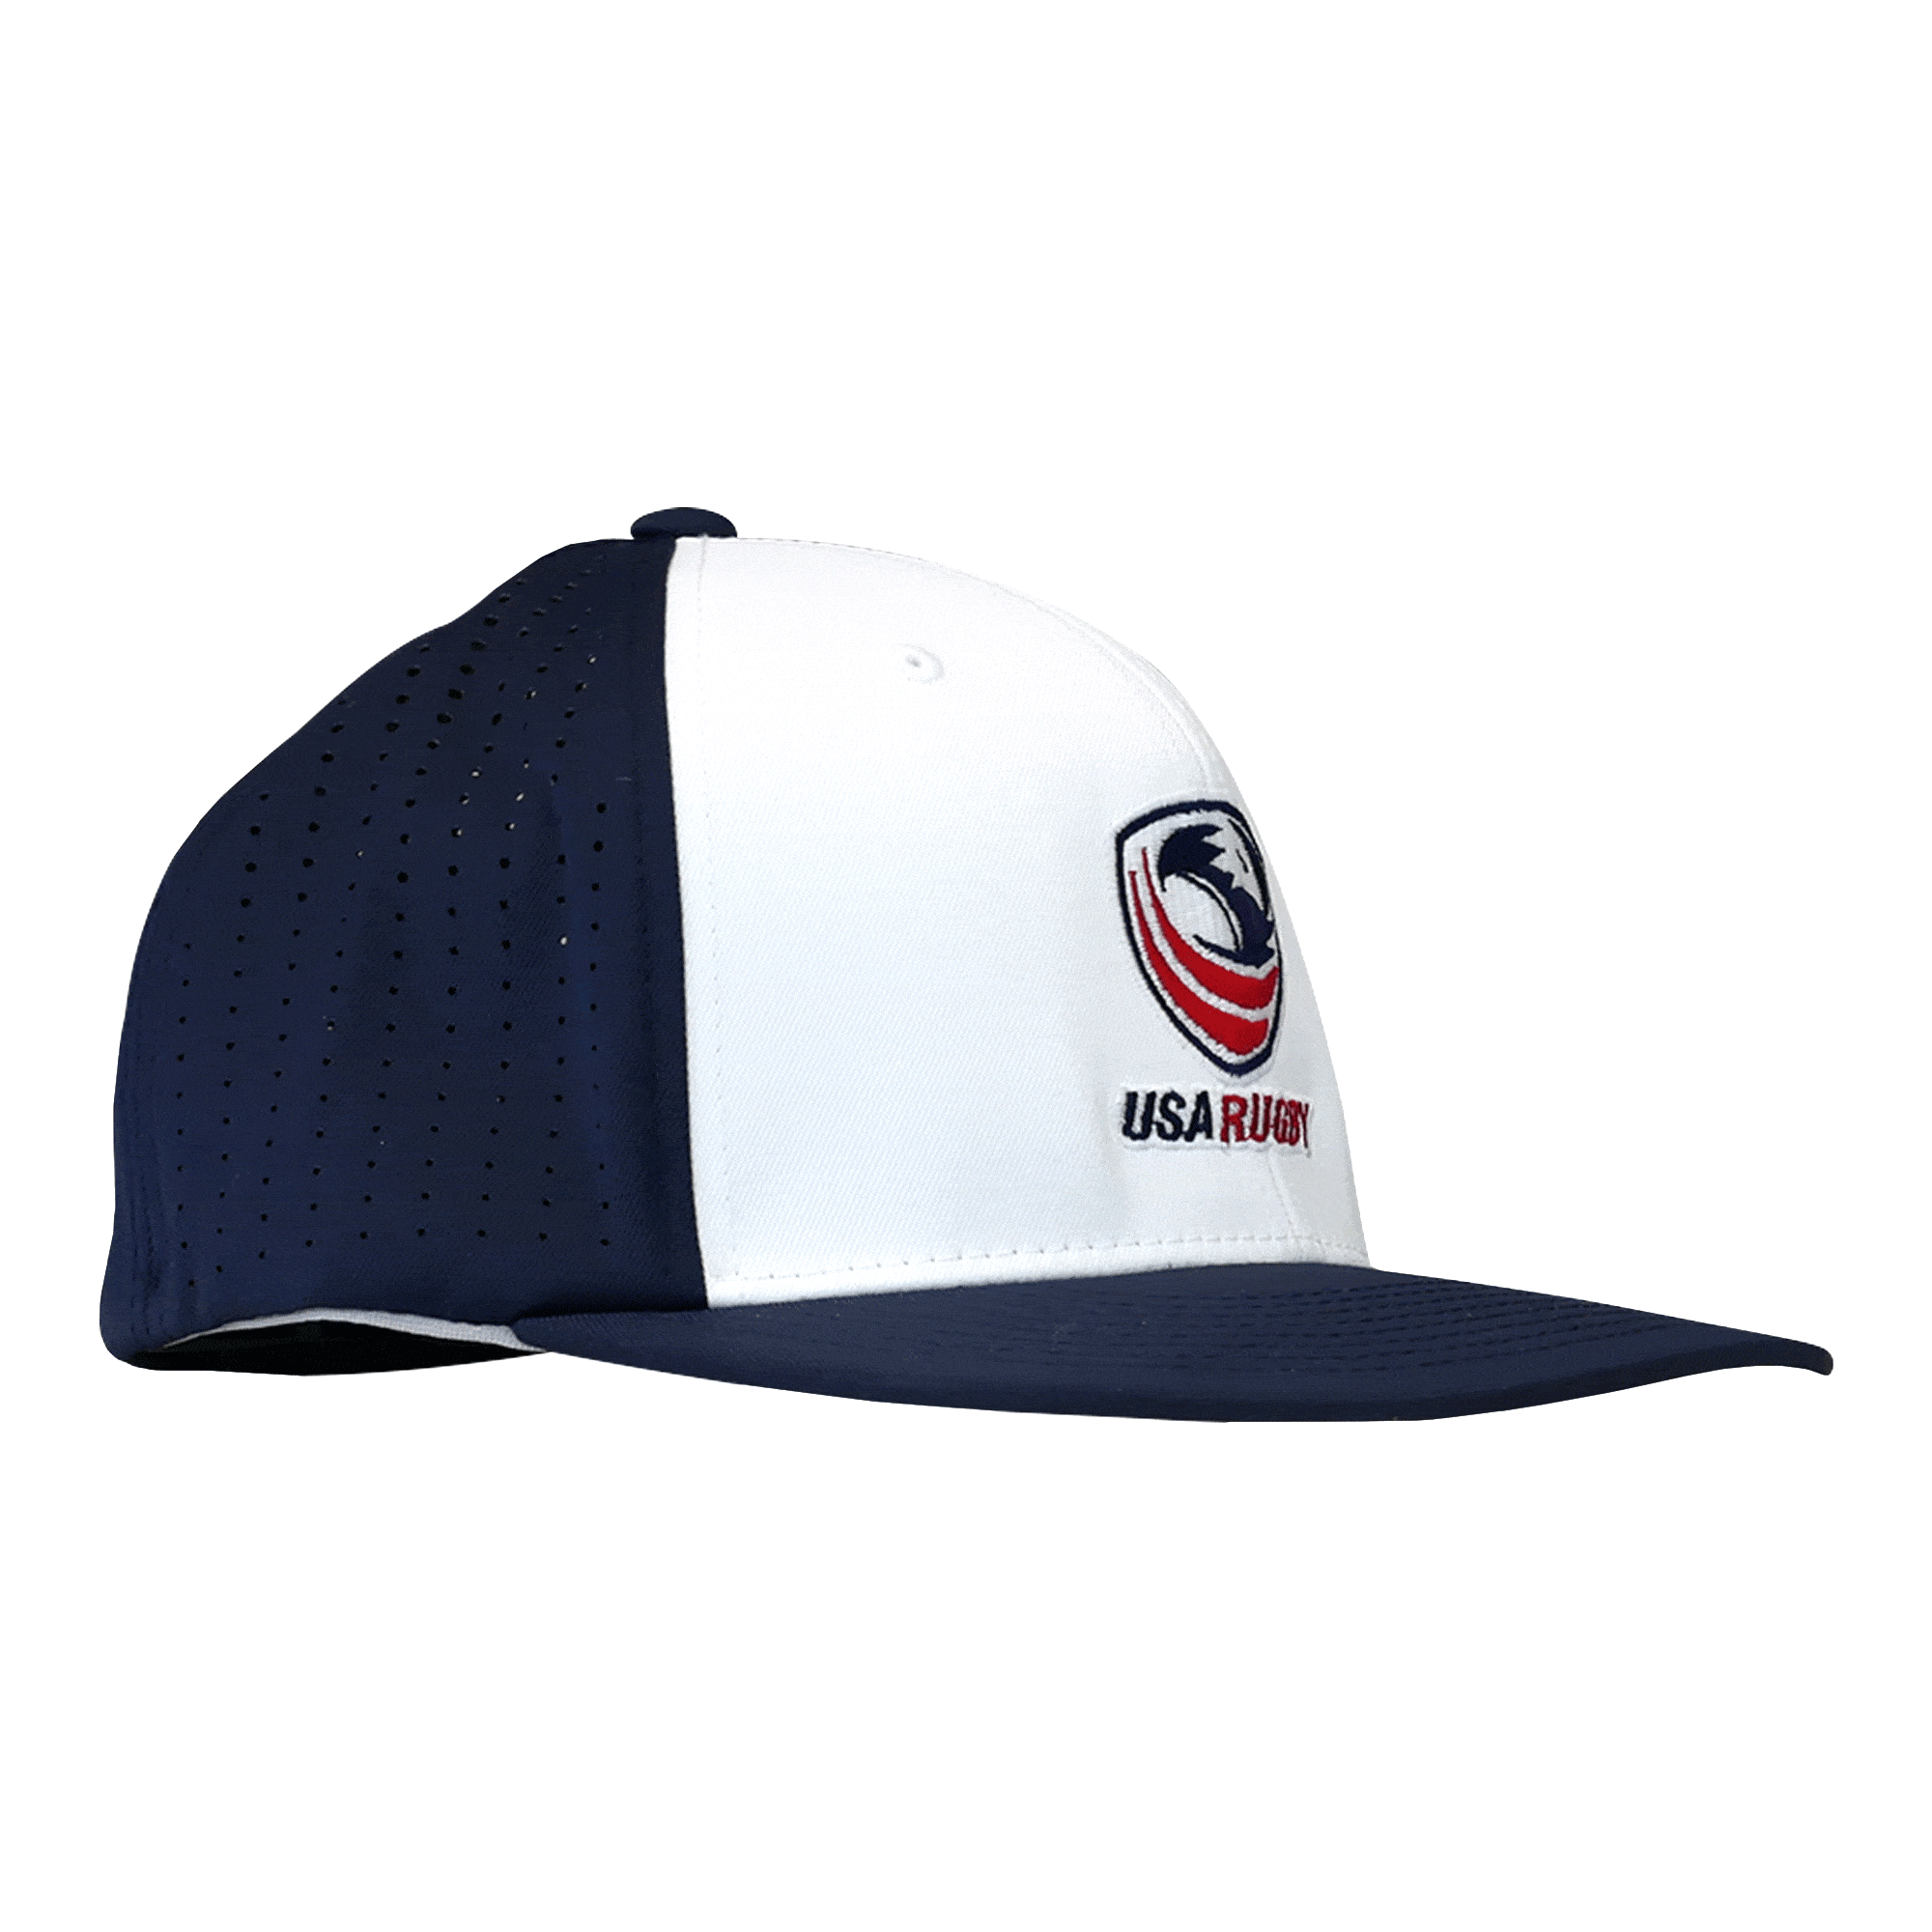 USA Rugby Perforated Performance Flexfit Cap - World Rugby Shop